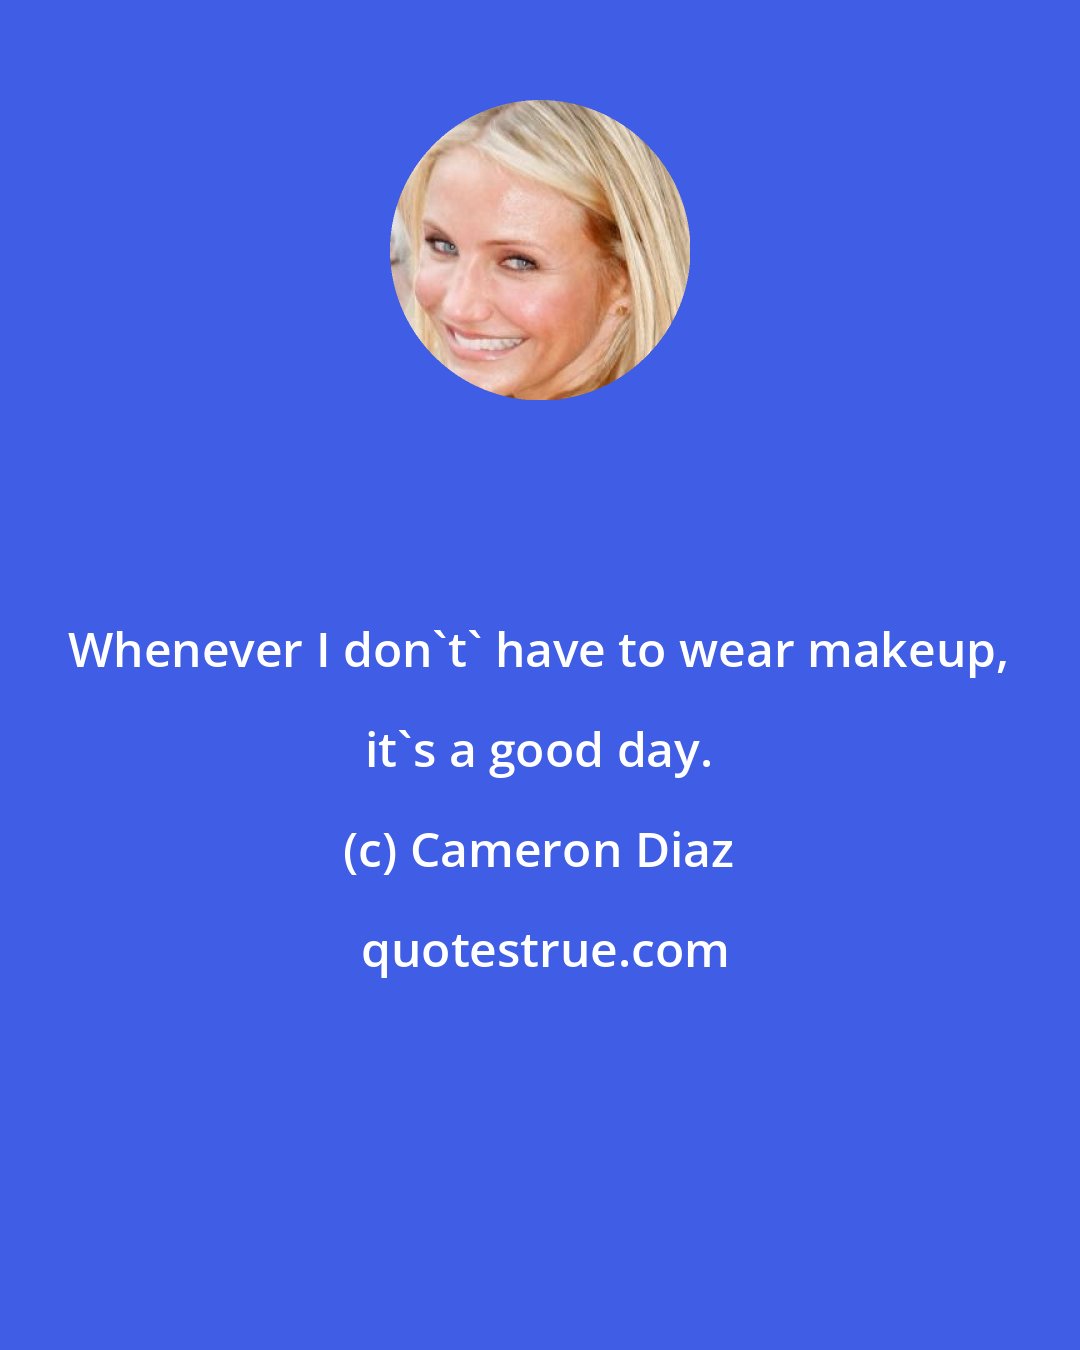 Cameron Diaz: Whenever I don't' have to wear makeup, it's a good day.